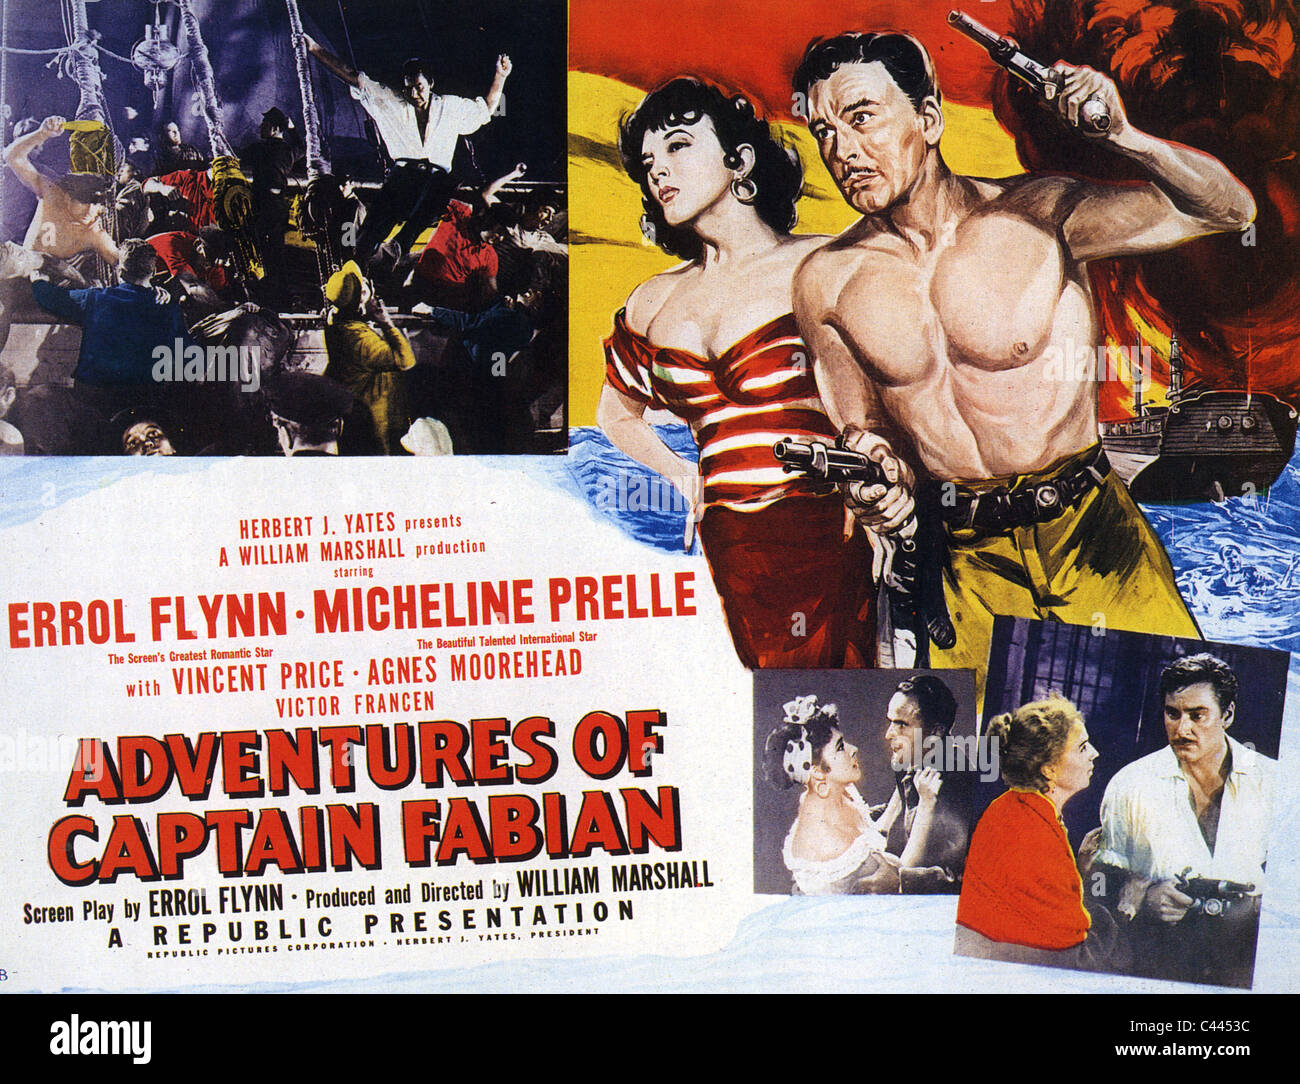 ADVENTURES OF CAPTAIN FABIAN Poster for 1951 Republic film with Errol Flynn and Micheline Prelle Stock Photo